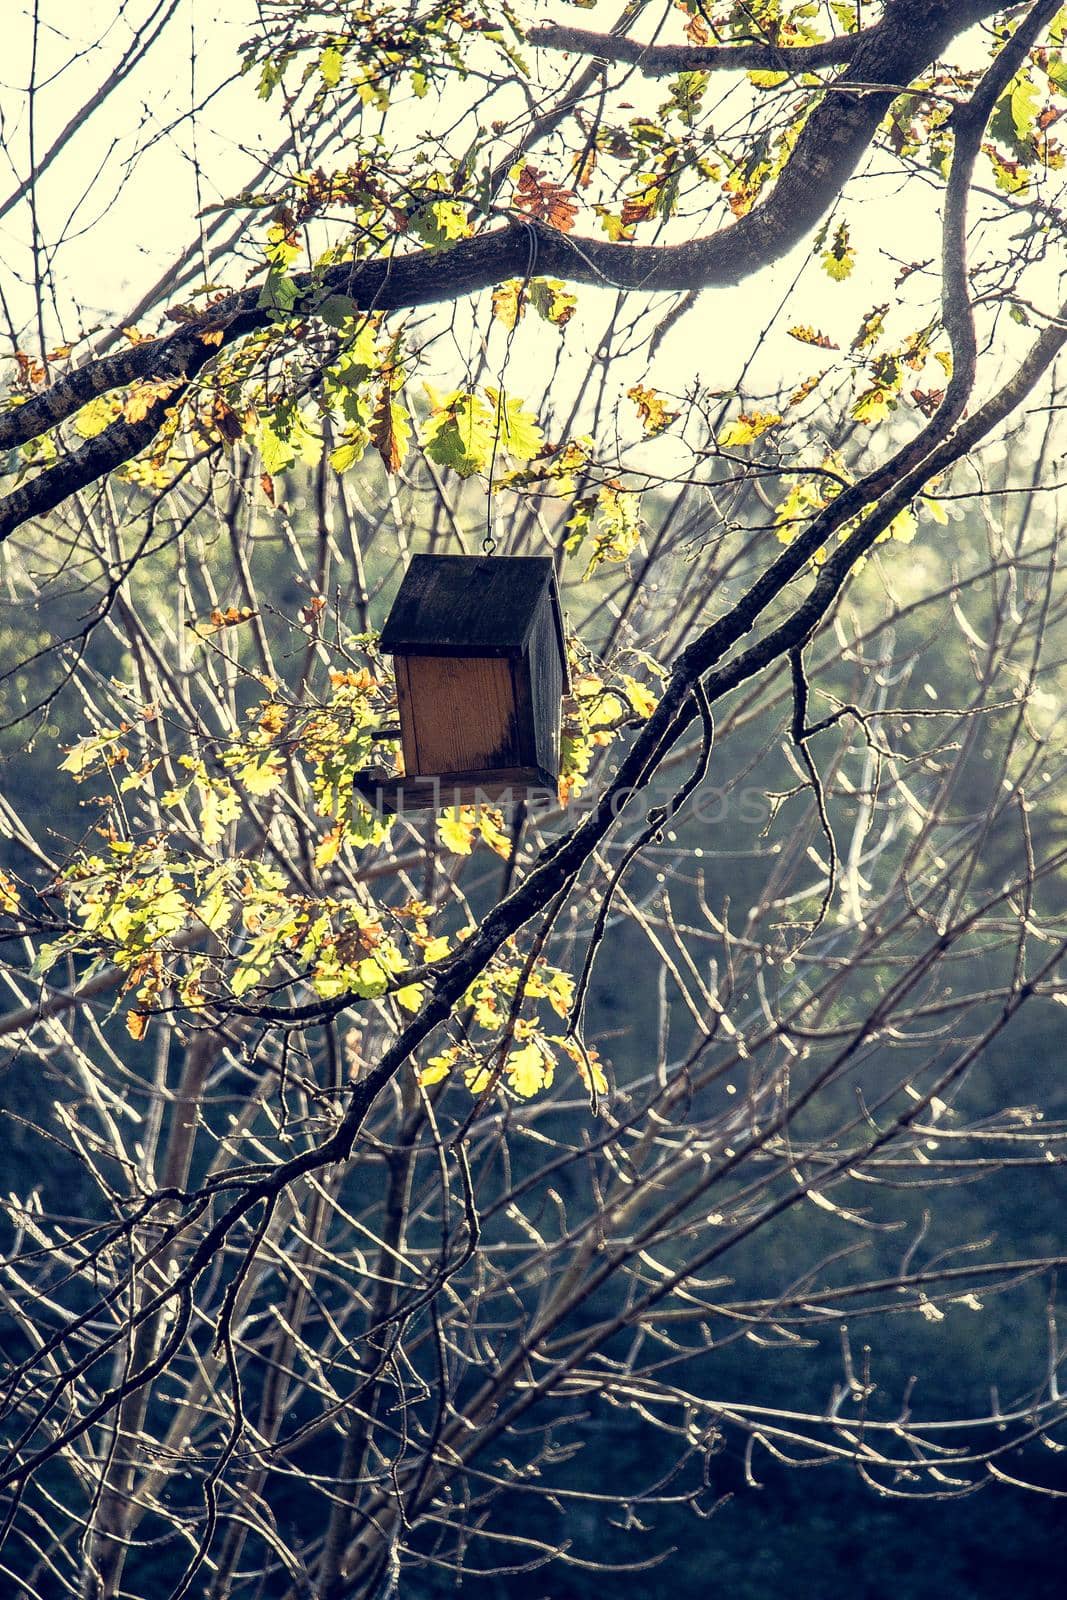 Wooden homemade birdhouse hanging on a  tree branch